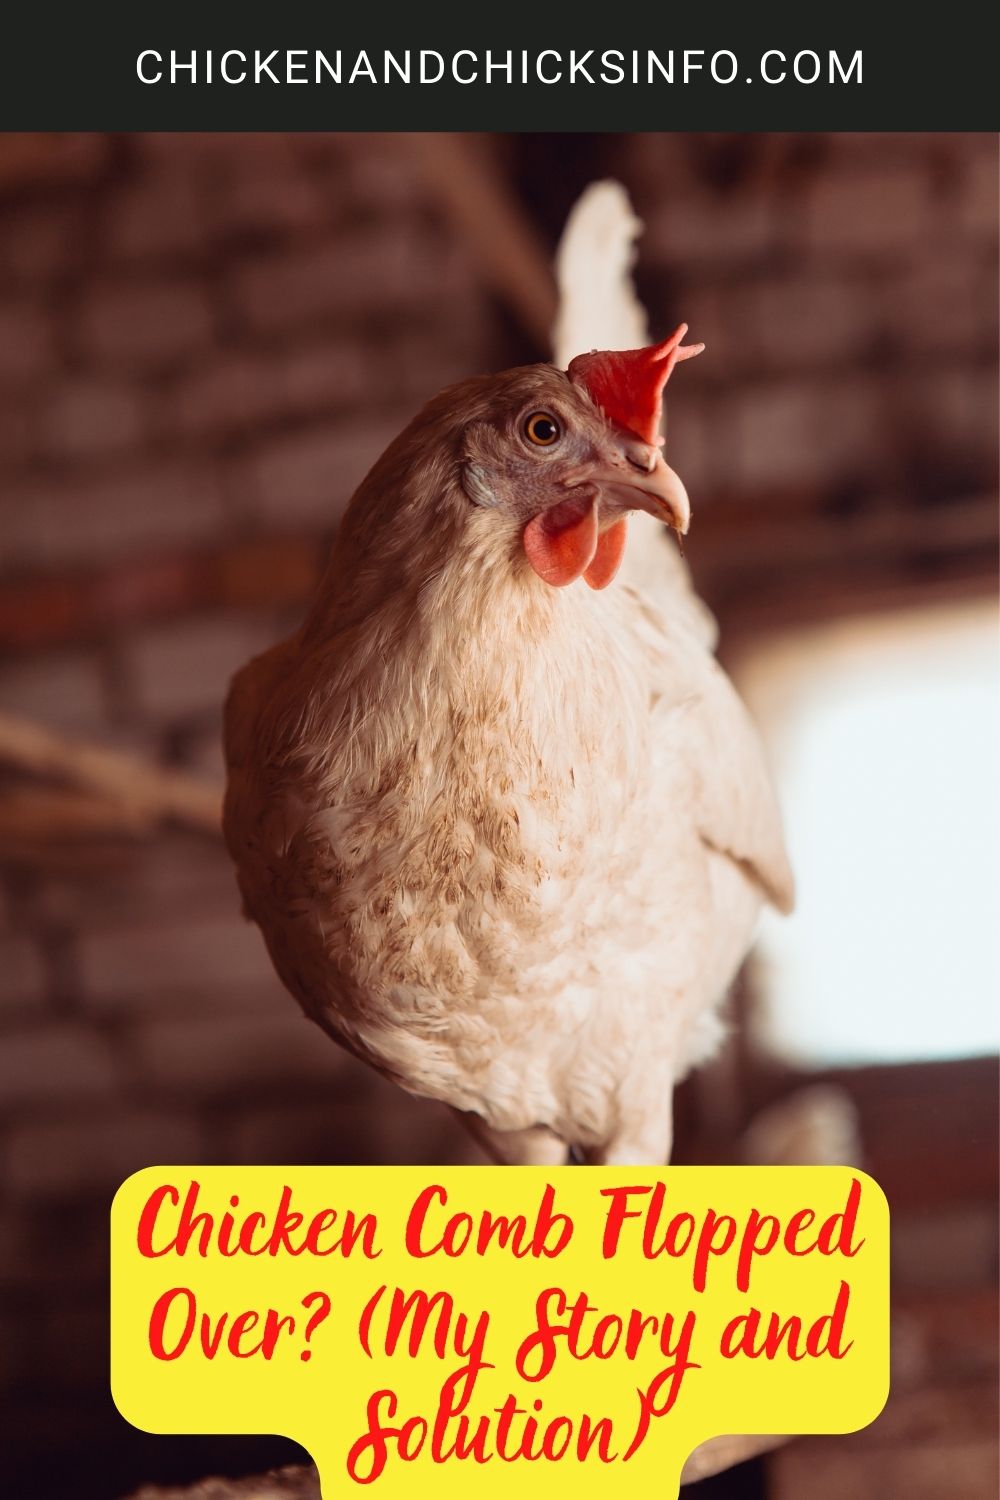 Chicken Comb Flopped Over? (My Story and Solution) poster.
